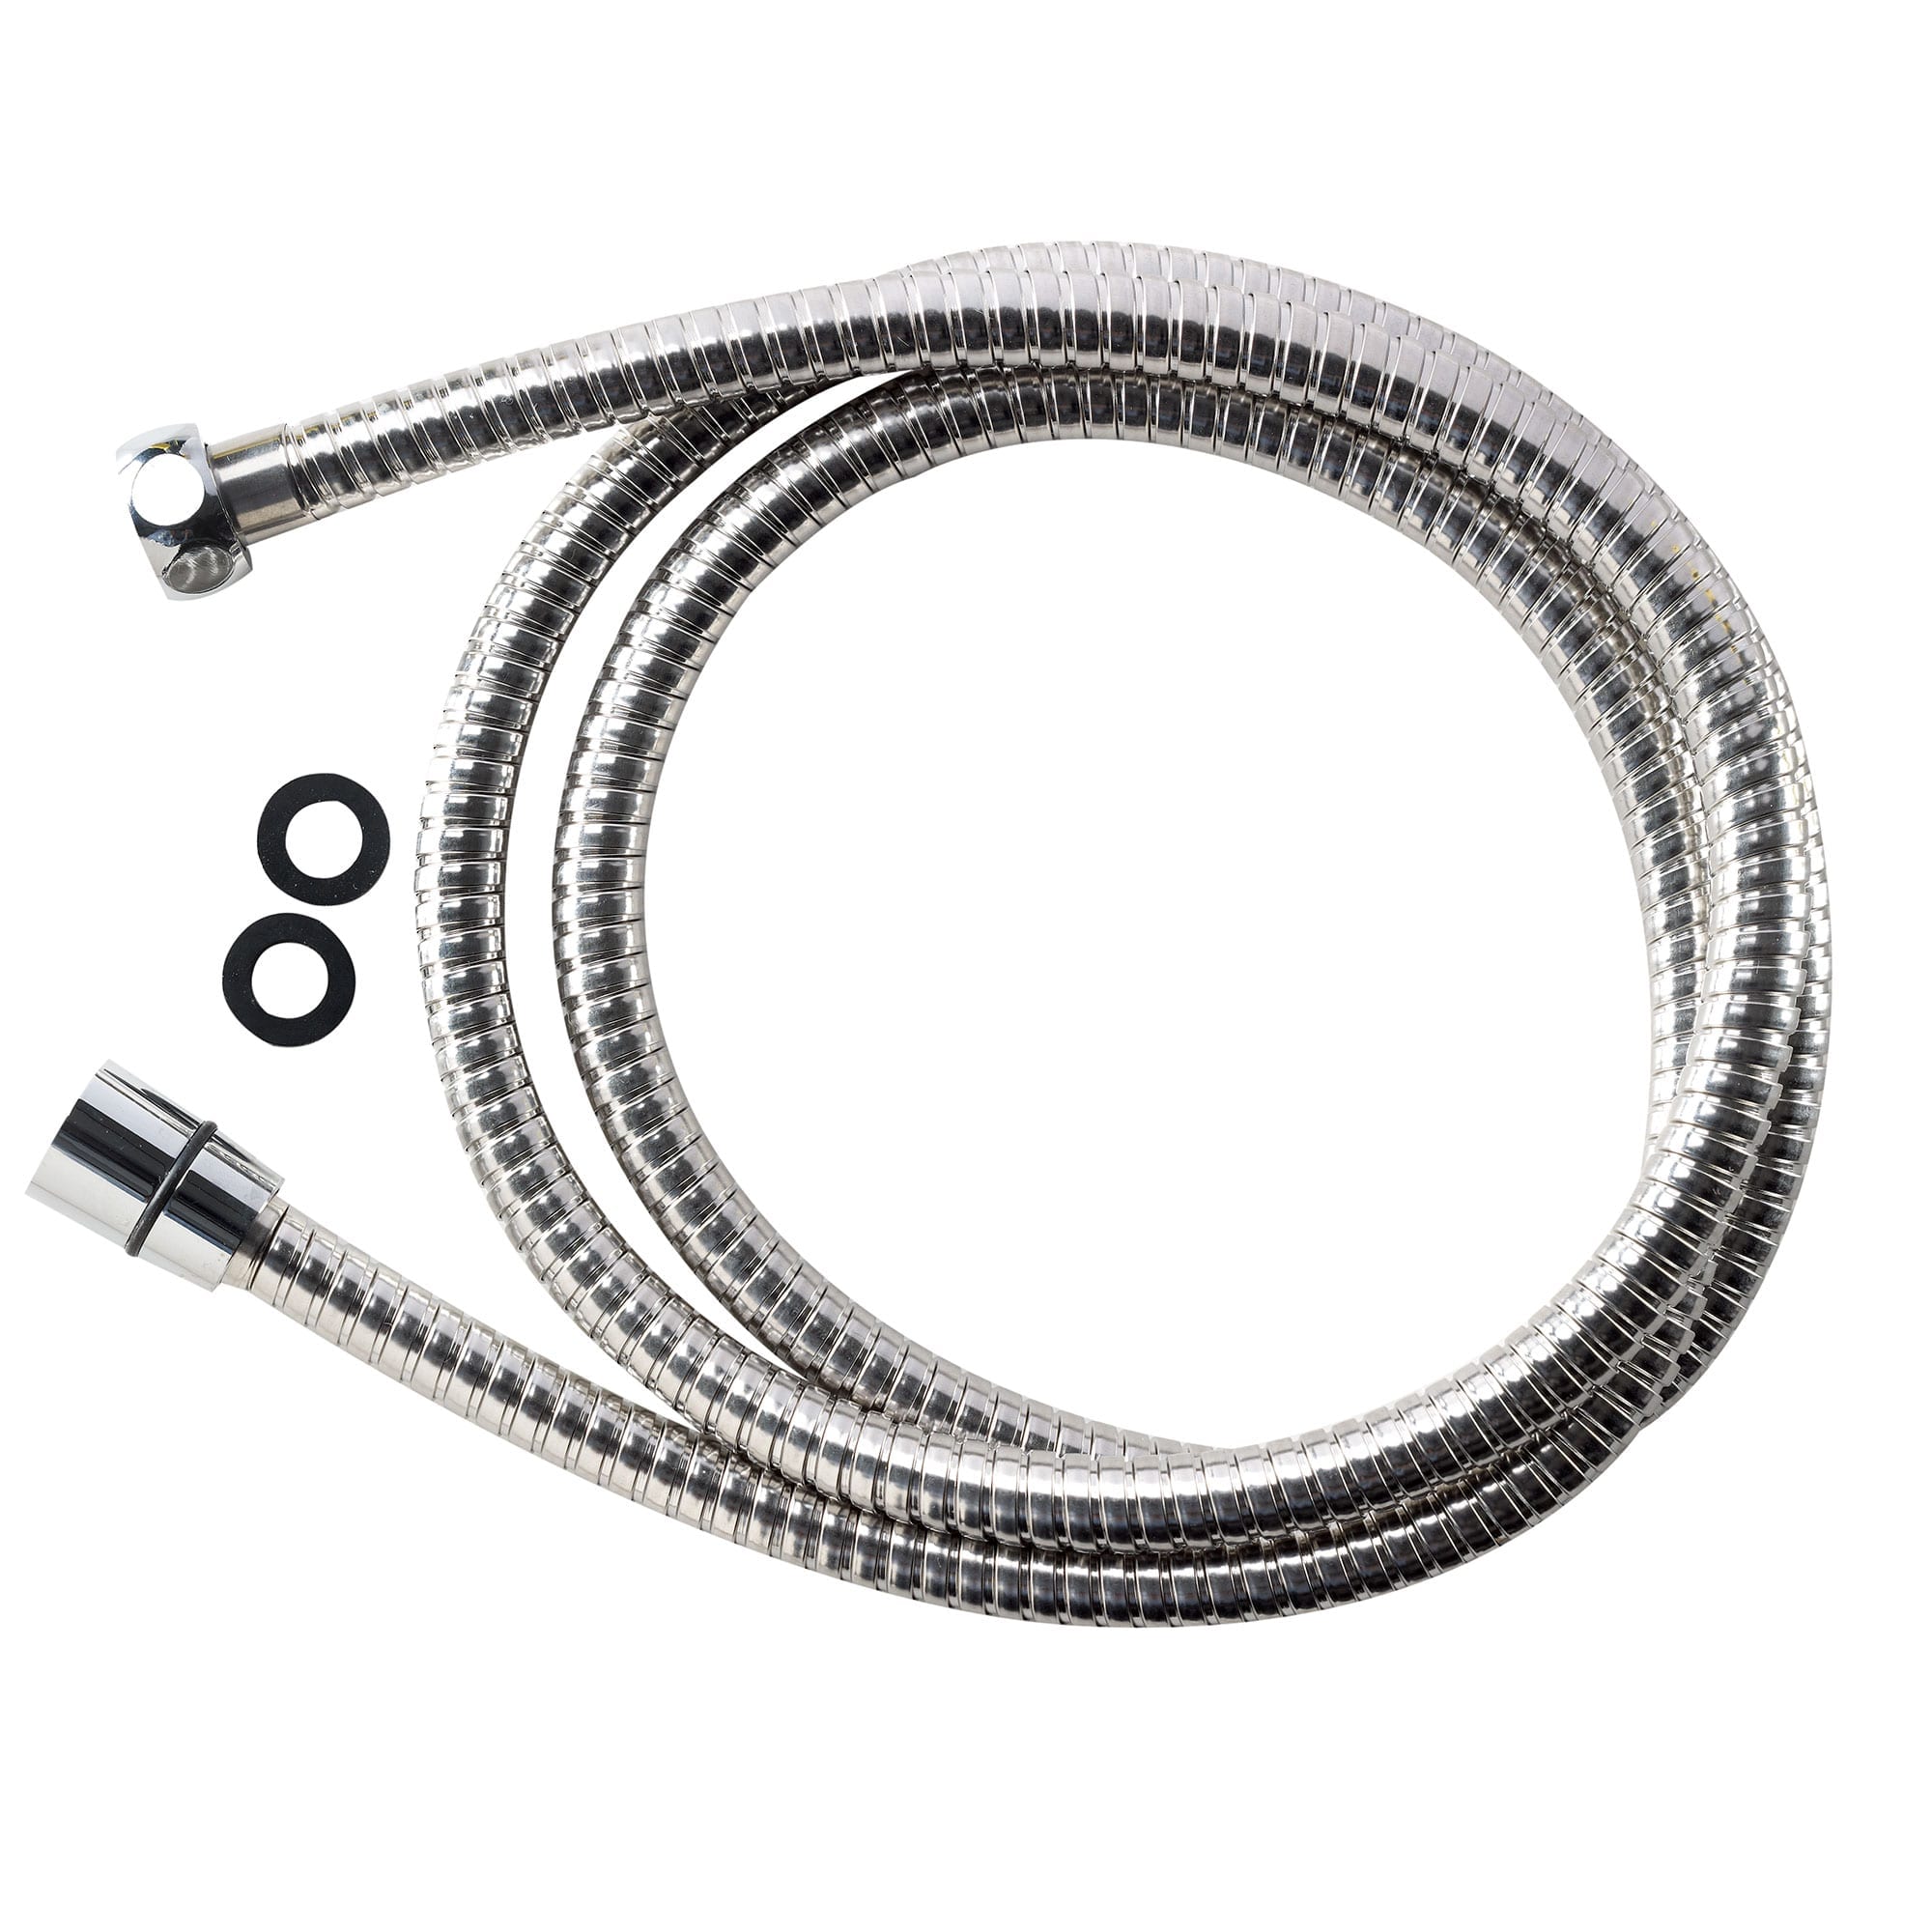 Bélanger 96179- Flexible Hose - Washers Included